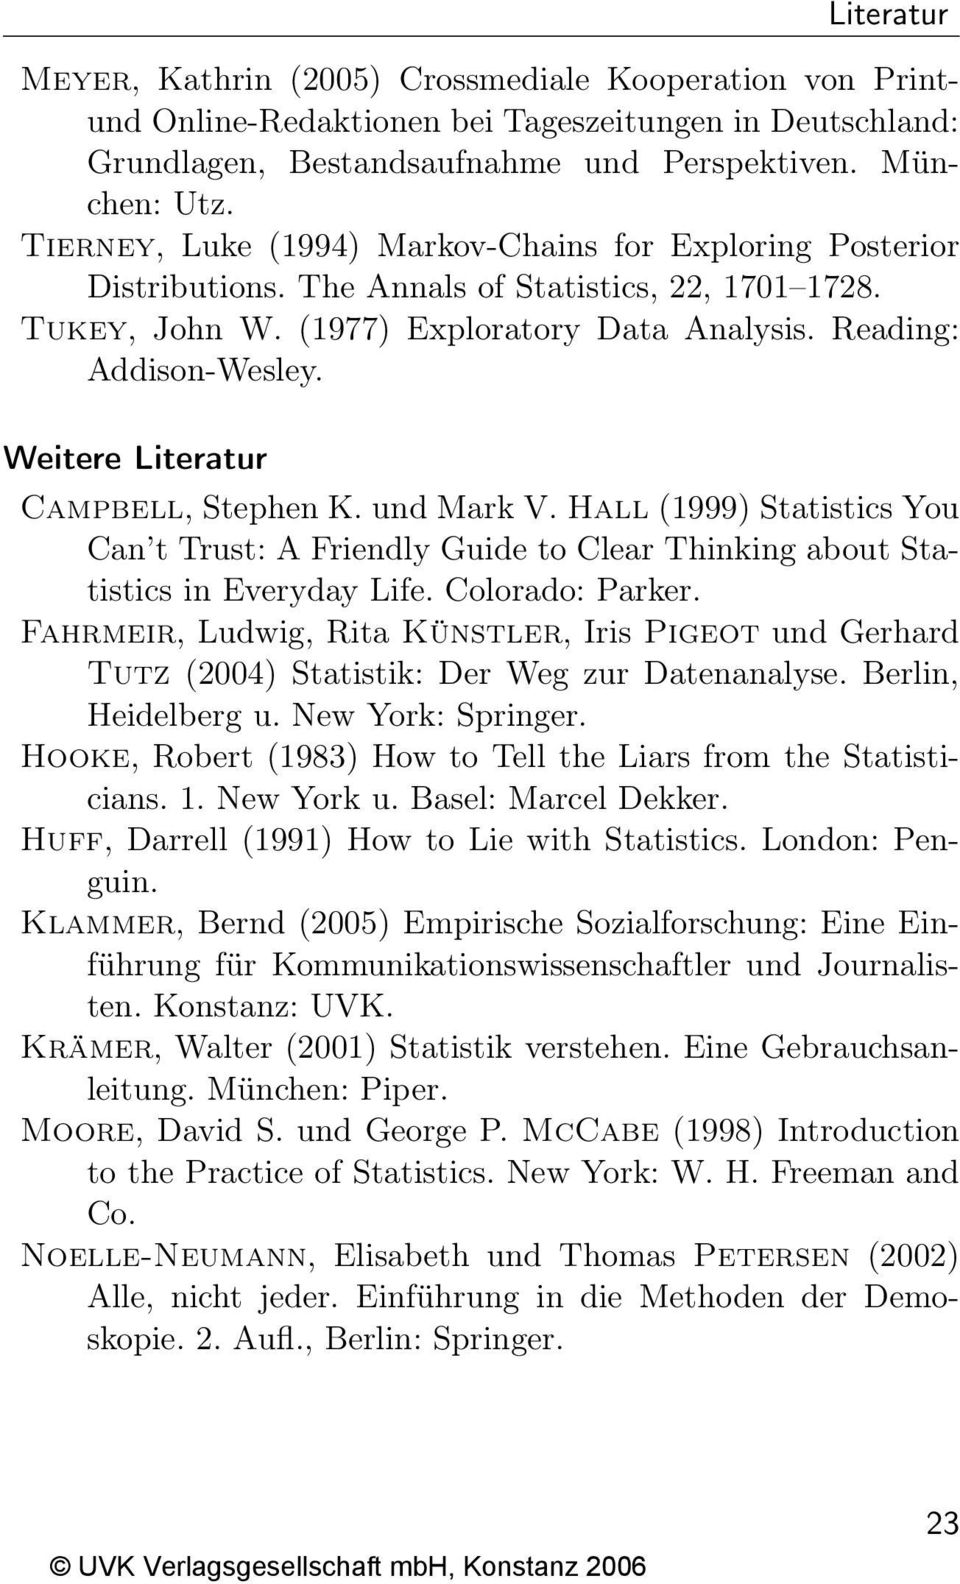 Weitere Literatur Campbell, Stephen K. und Mark V. Hall (1999) Statistics You Can t Trust: A Friendly Guide to Clear Thinking about Statistics in Everyday Life. Colorado: Parker.